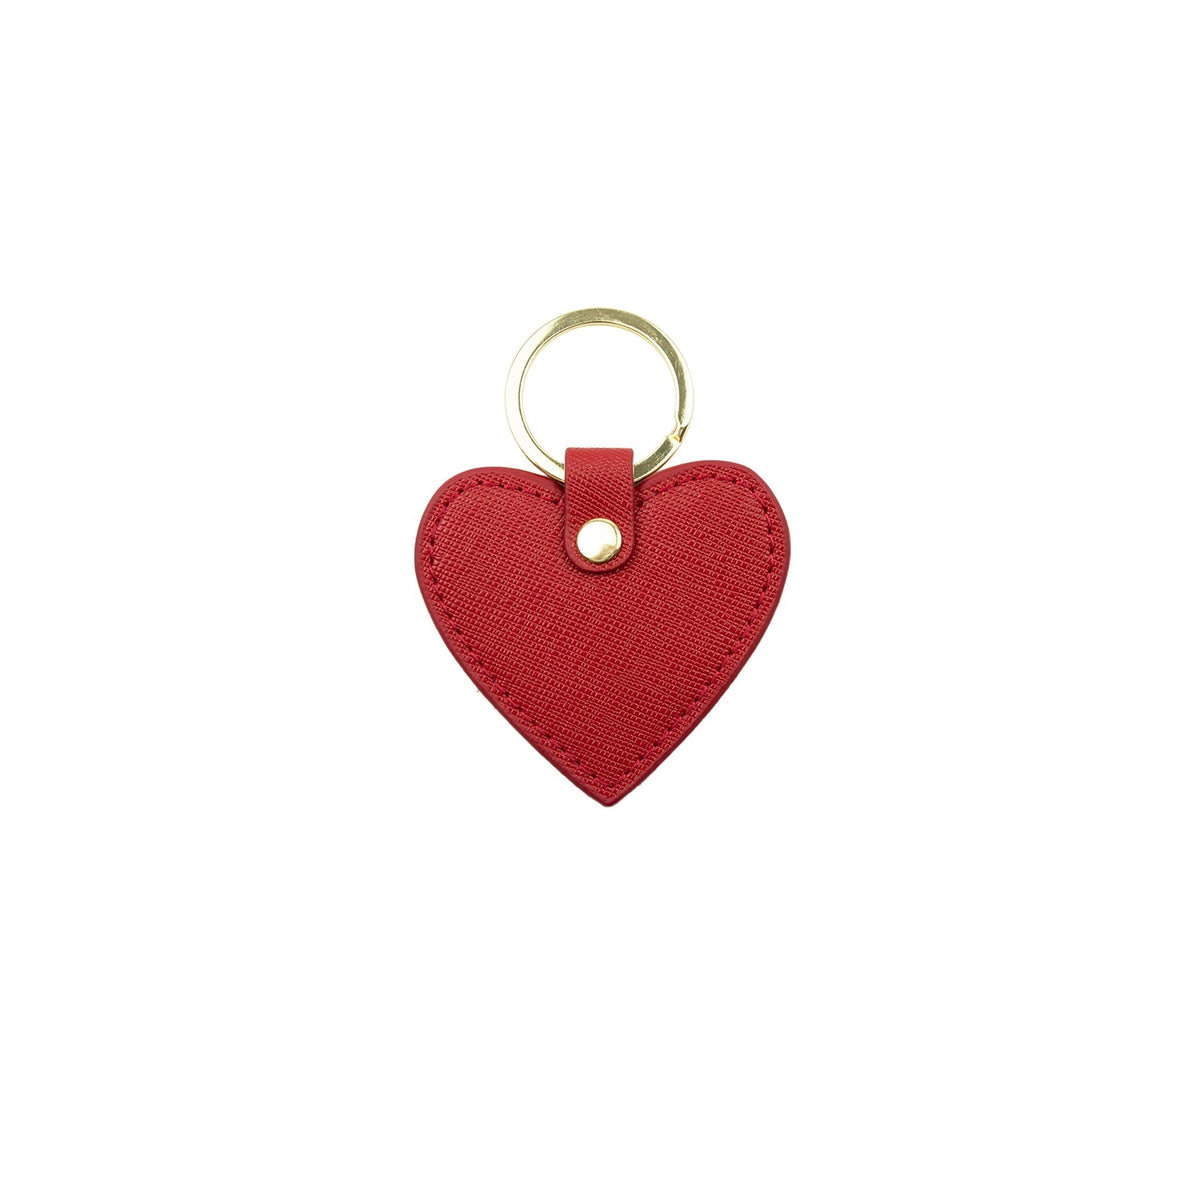 Personalised Heart Keyring - Red Saffiano Leather